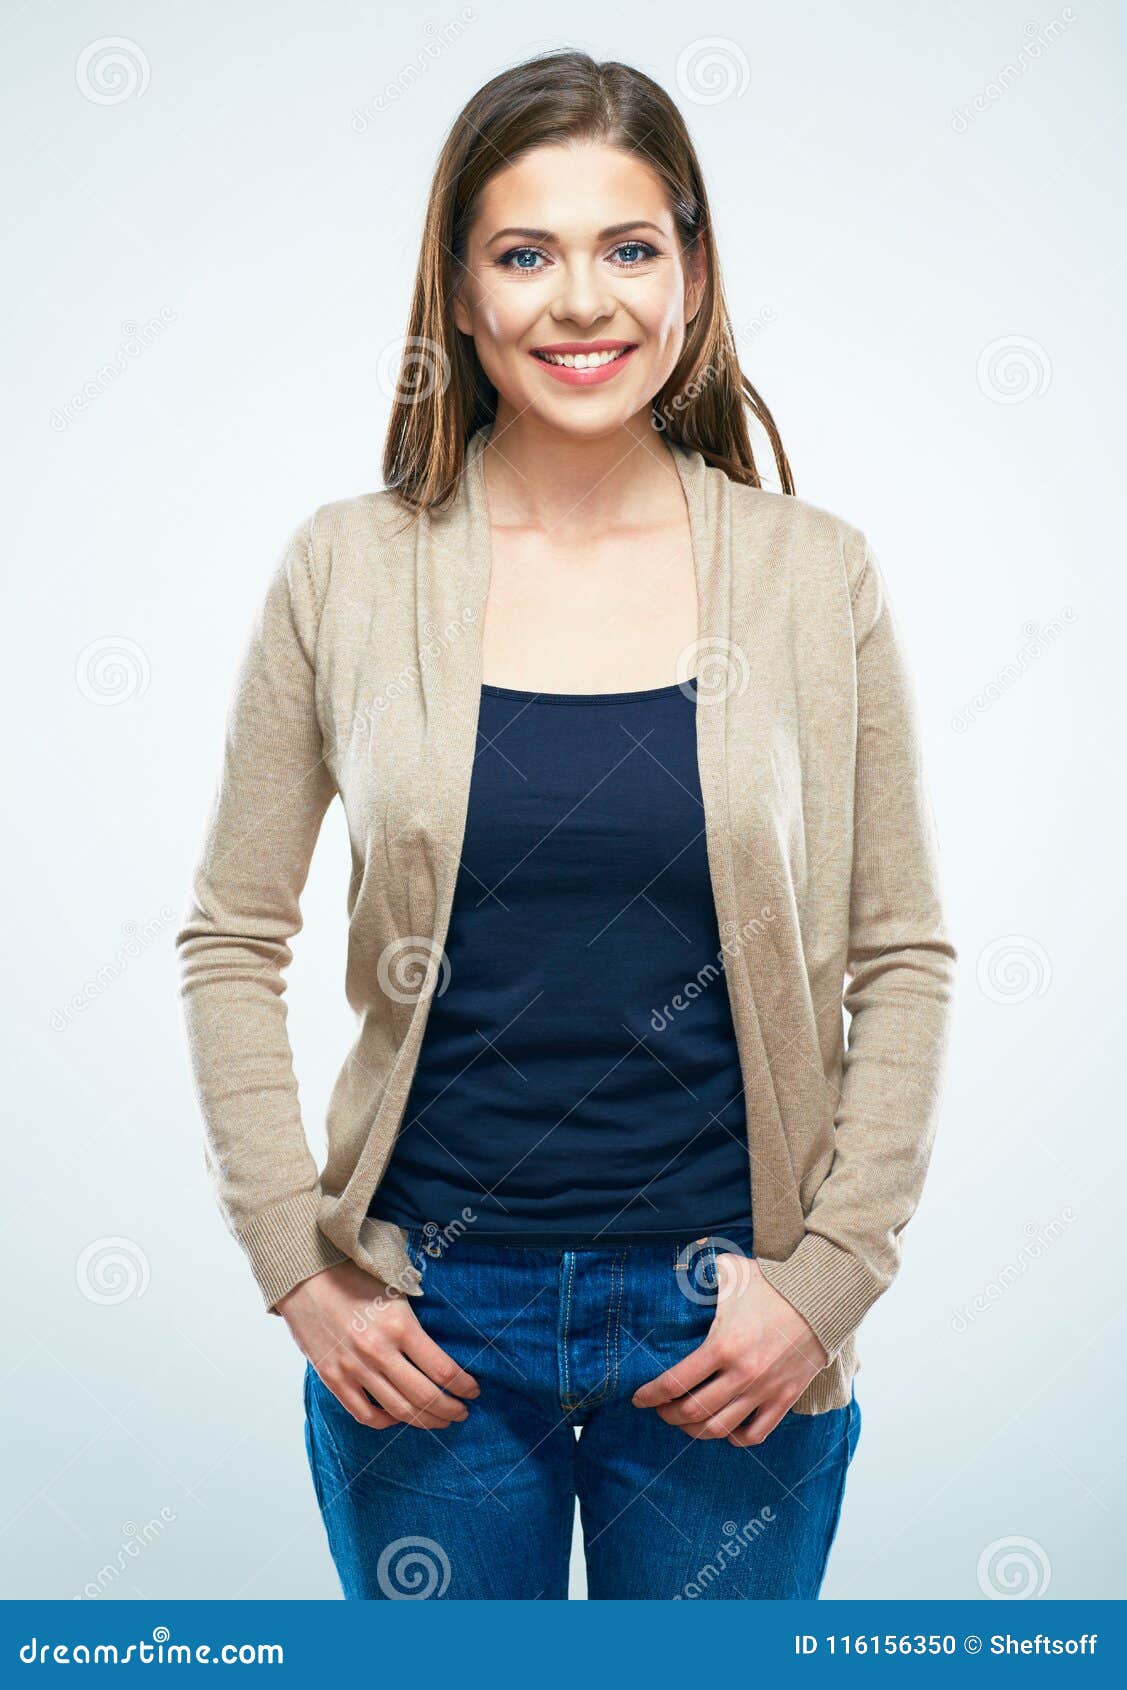 Beautiful Smiling Casual Dressed Young Woman Stock Photo - Image of ...